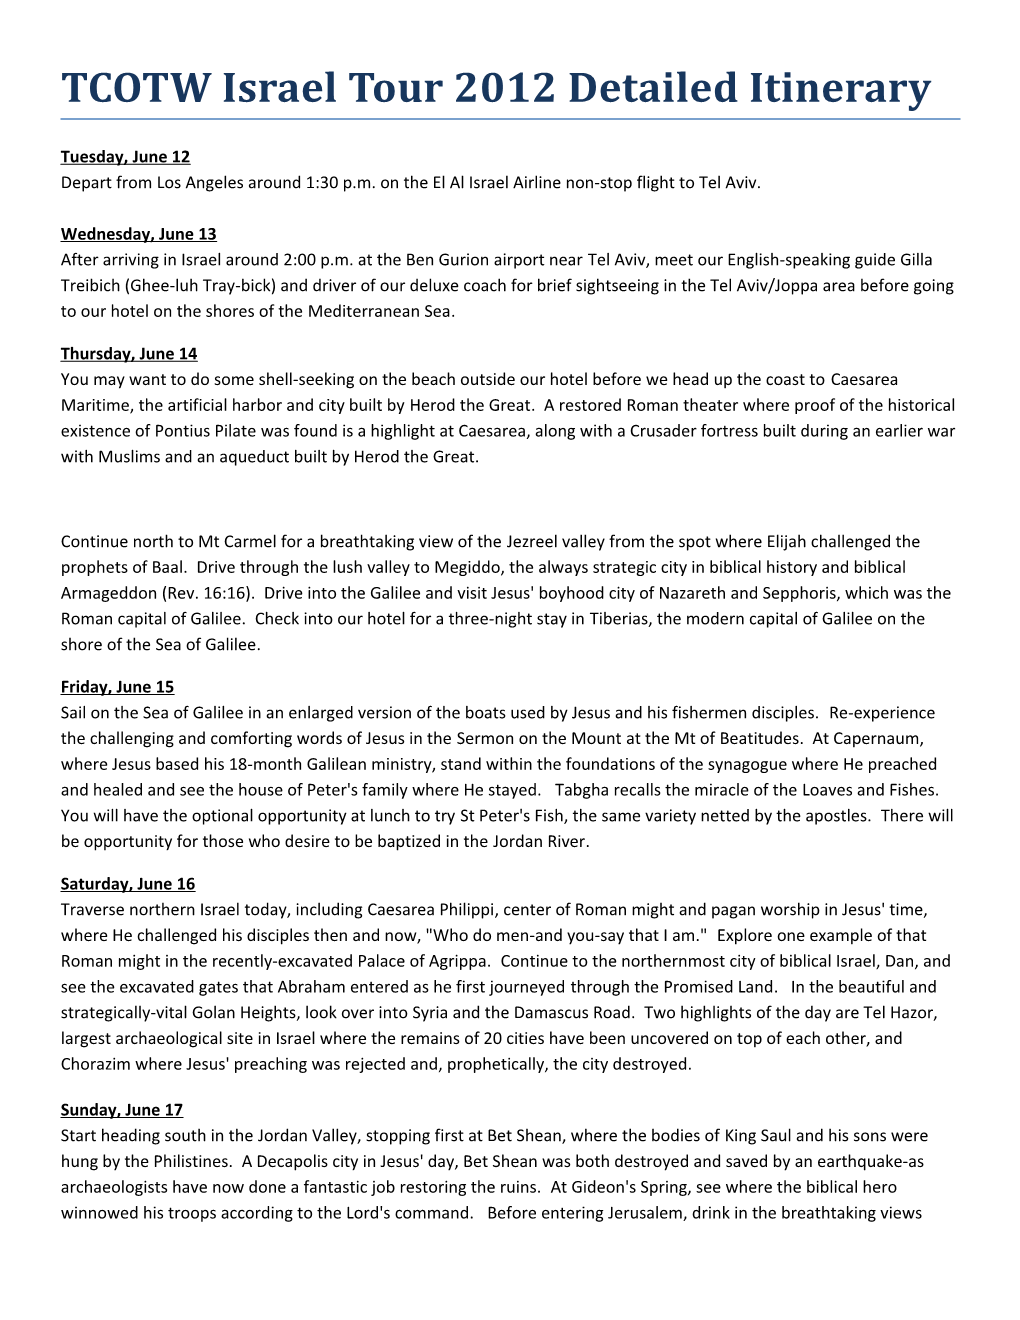 TCOTW Israel Tour 2012 Detailed Itinerary